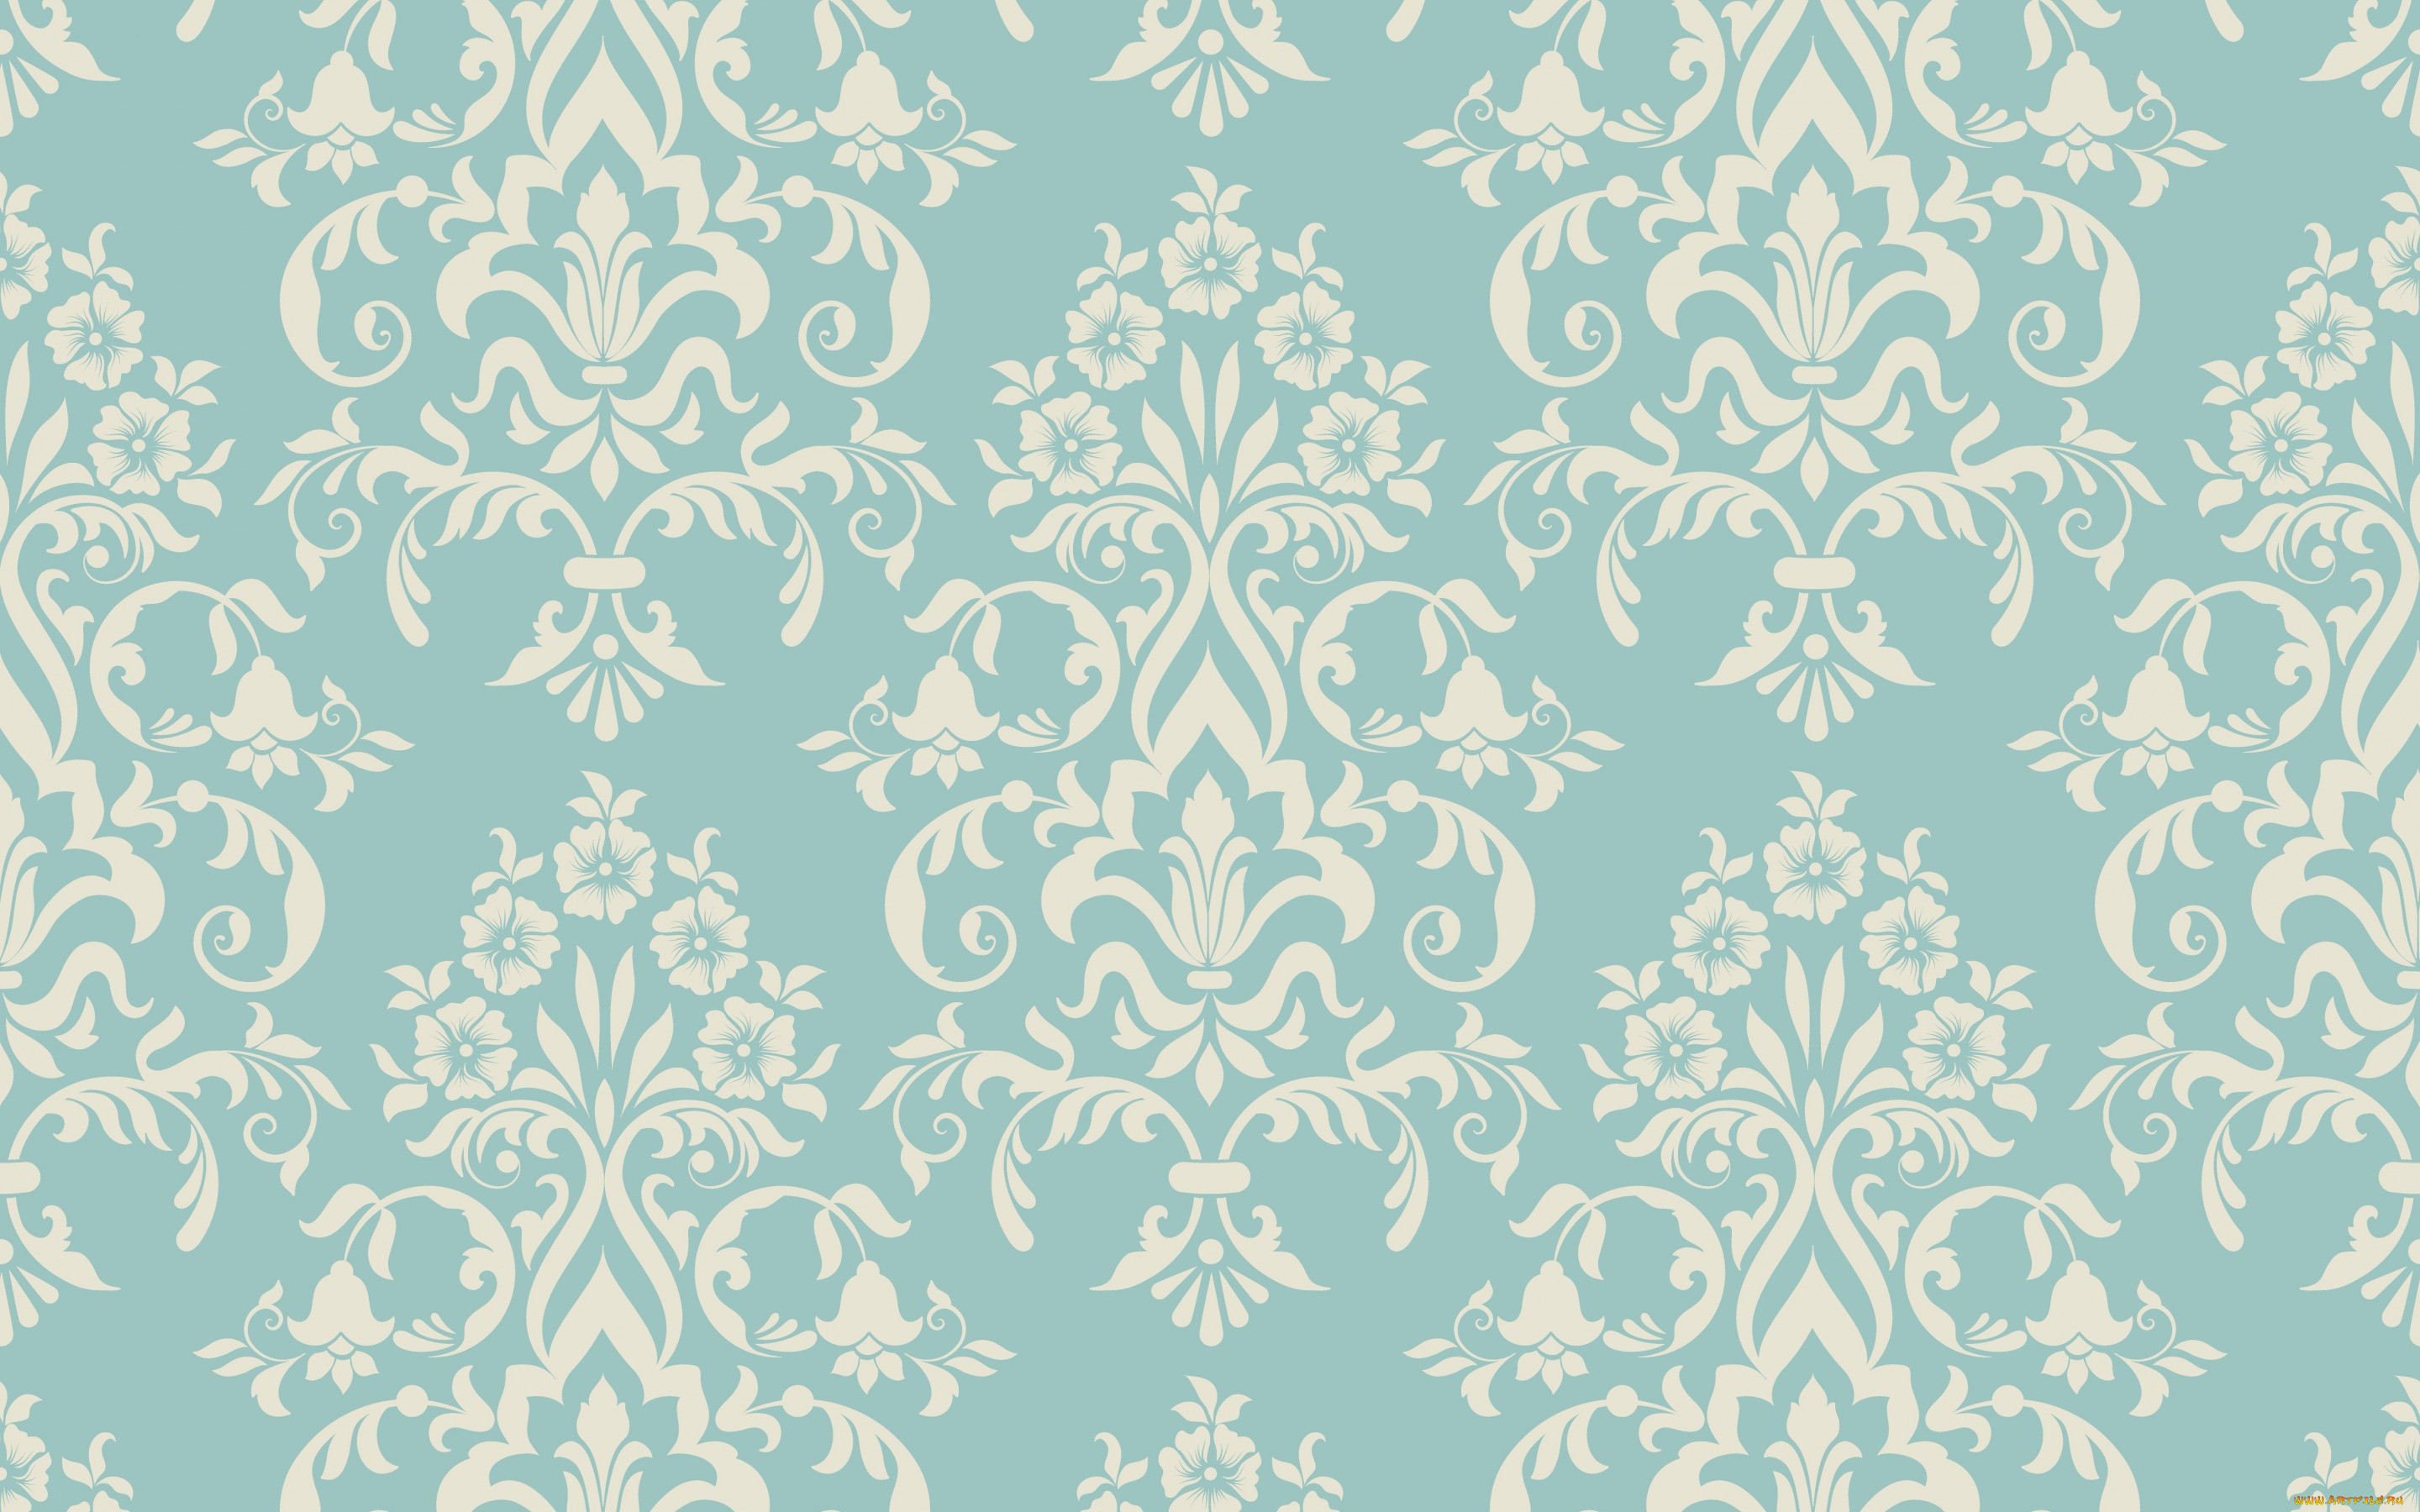  ,  , graphics, , ornament, foral, background, , seamless, pattern, template, , design, vector, retro, vintage, texture